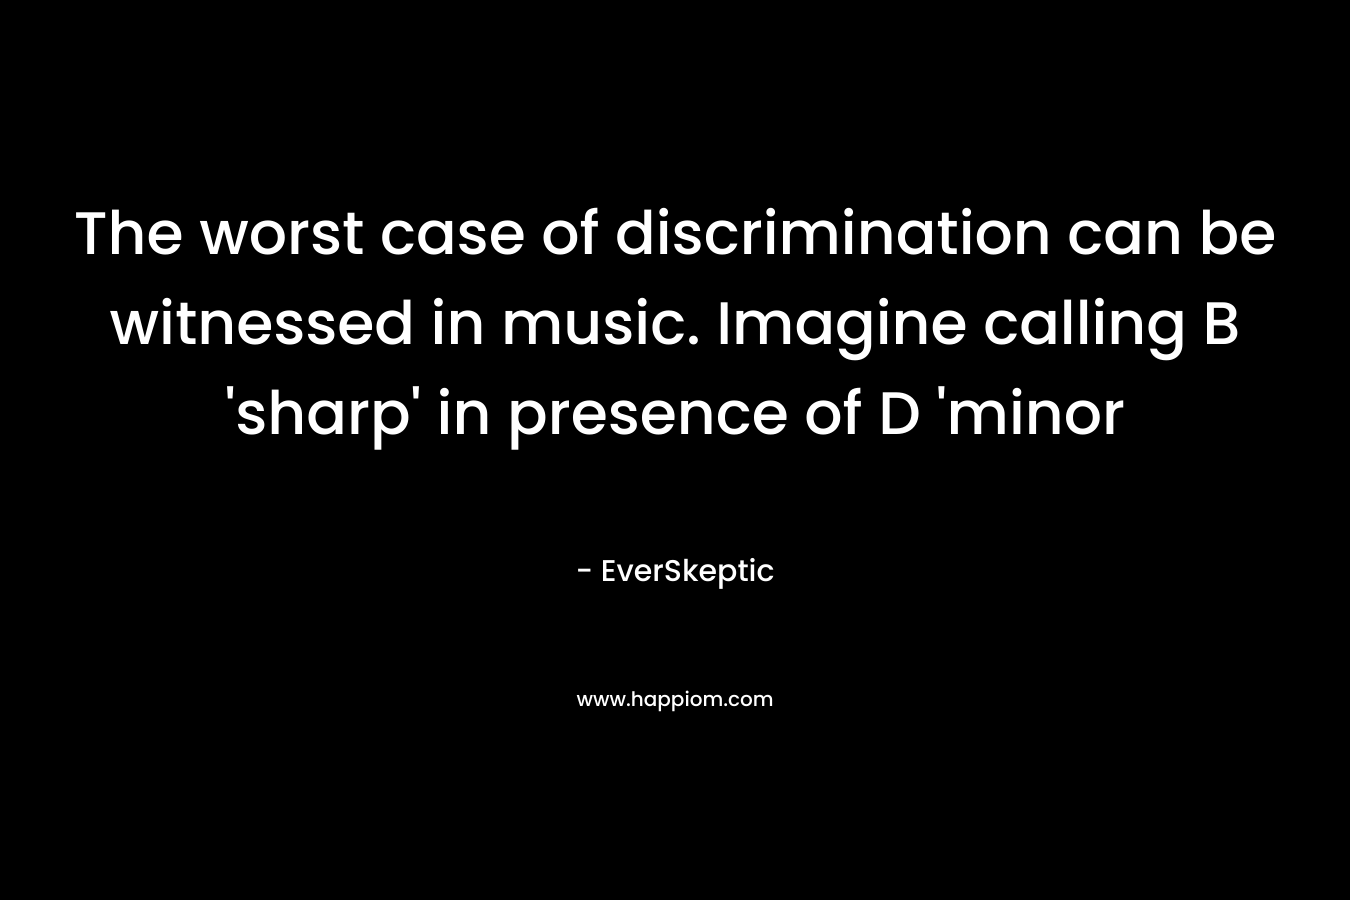 The worst case of discrimination can be witnessed in music. Imagine calling B 'sharp' in presence of D 'minor